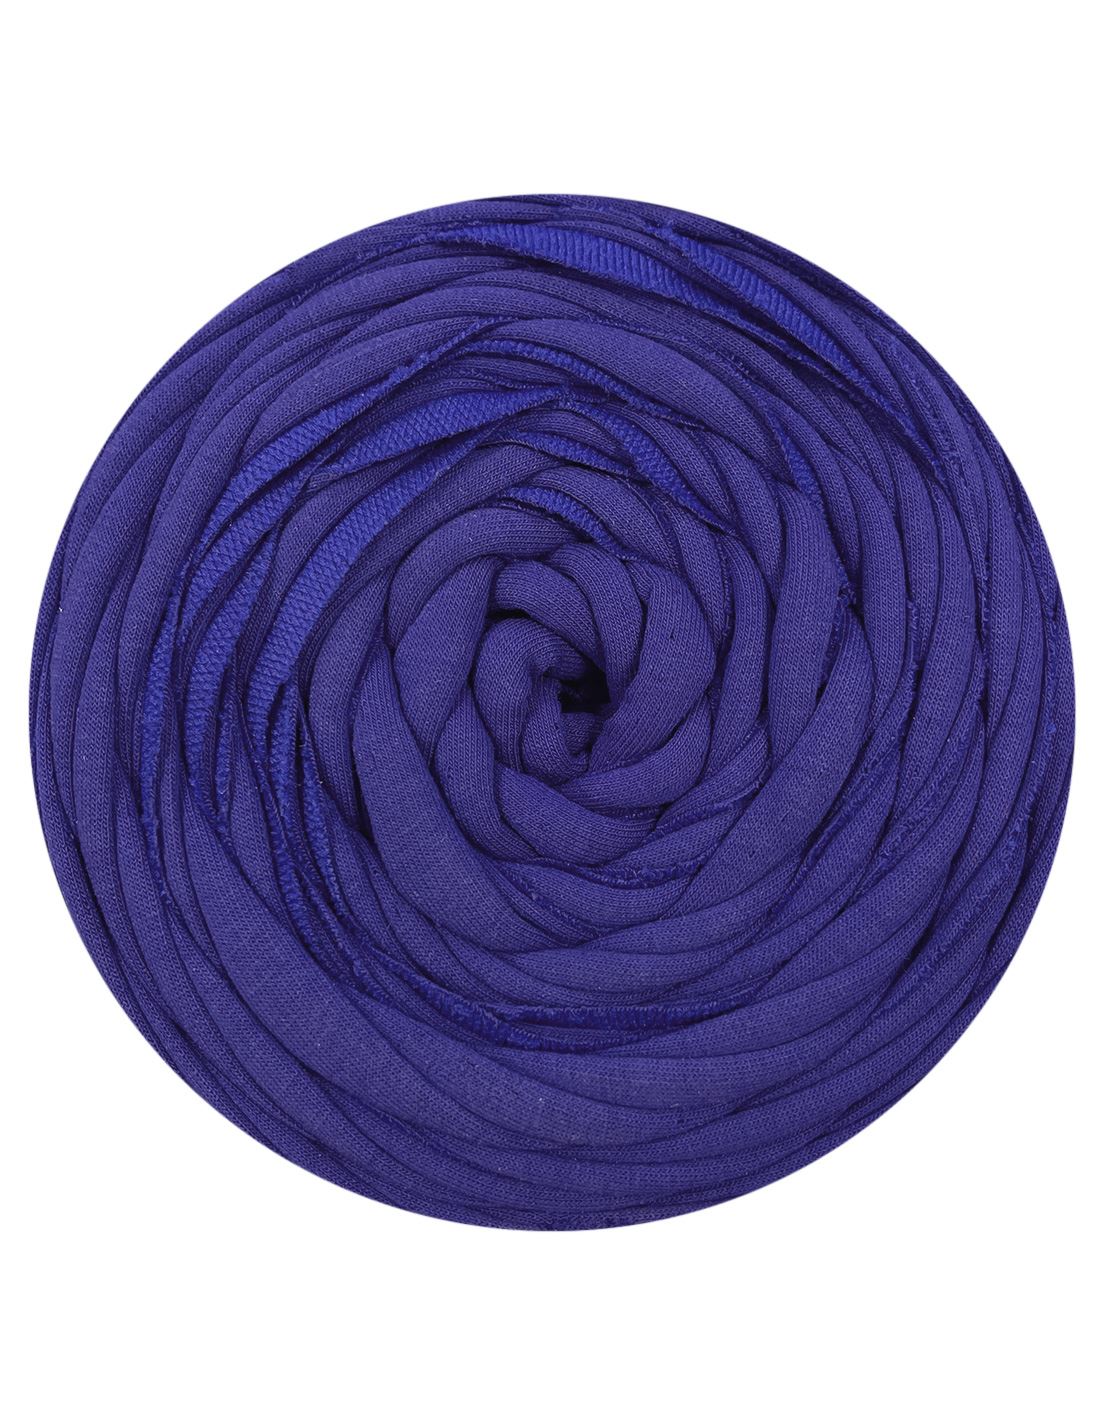 Muted blue t-shirt yarn by Hoooked Zpagetti (100-120m)